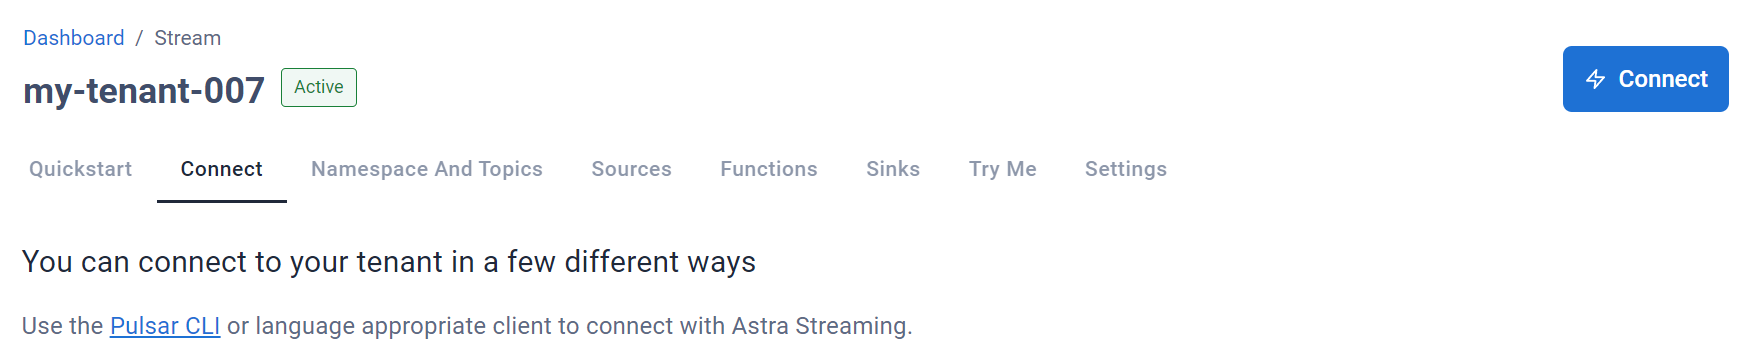 Connect tab in Astra Streaming